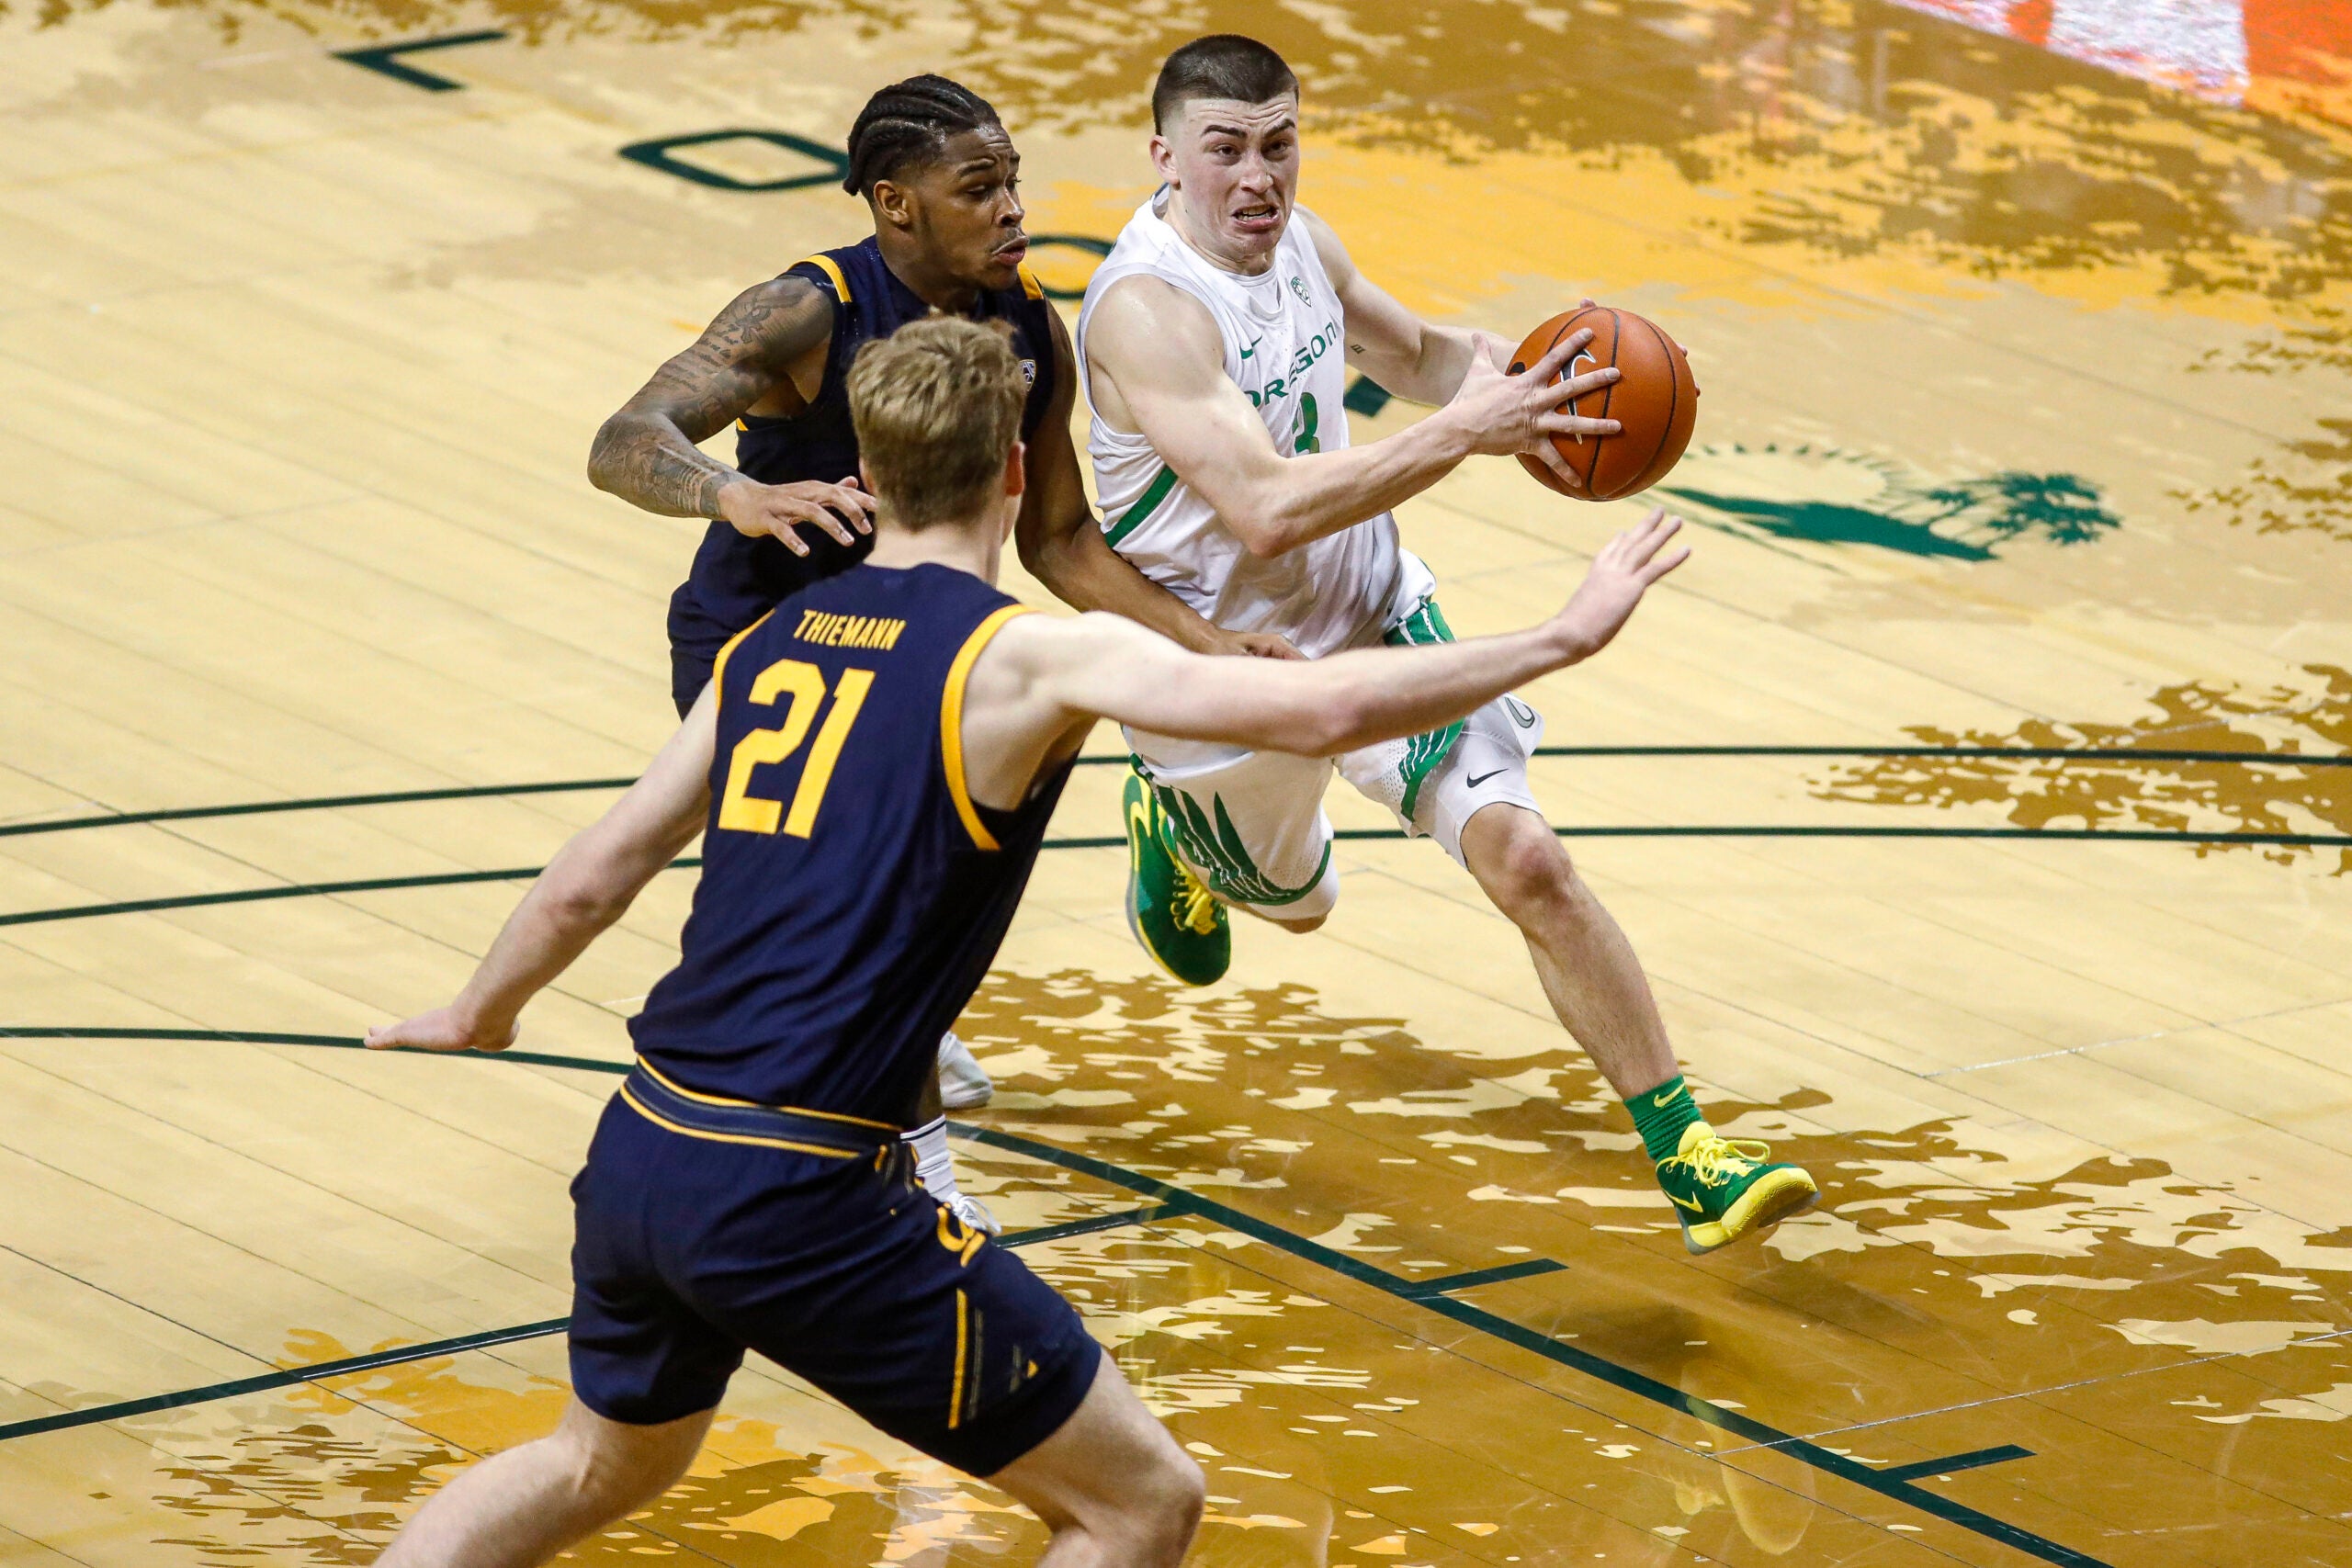 Celtics rookies Payton Pritchard and Aaron Nesmith described how they're  adjusting to the NBA